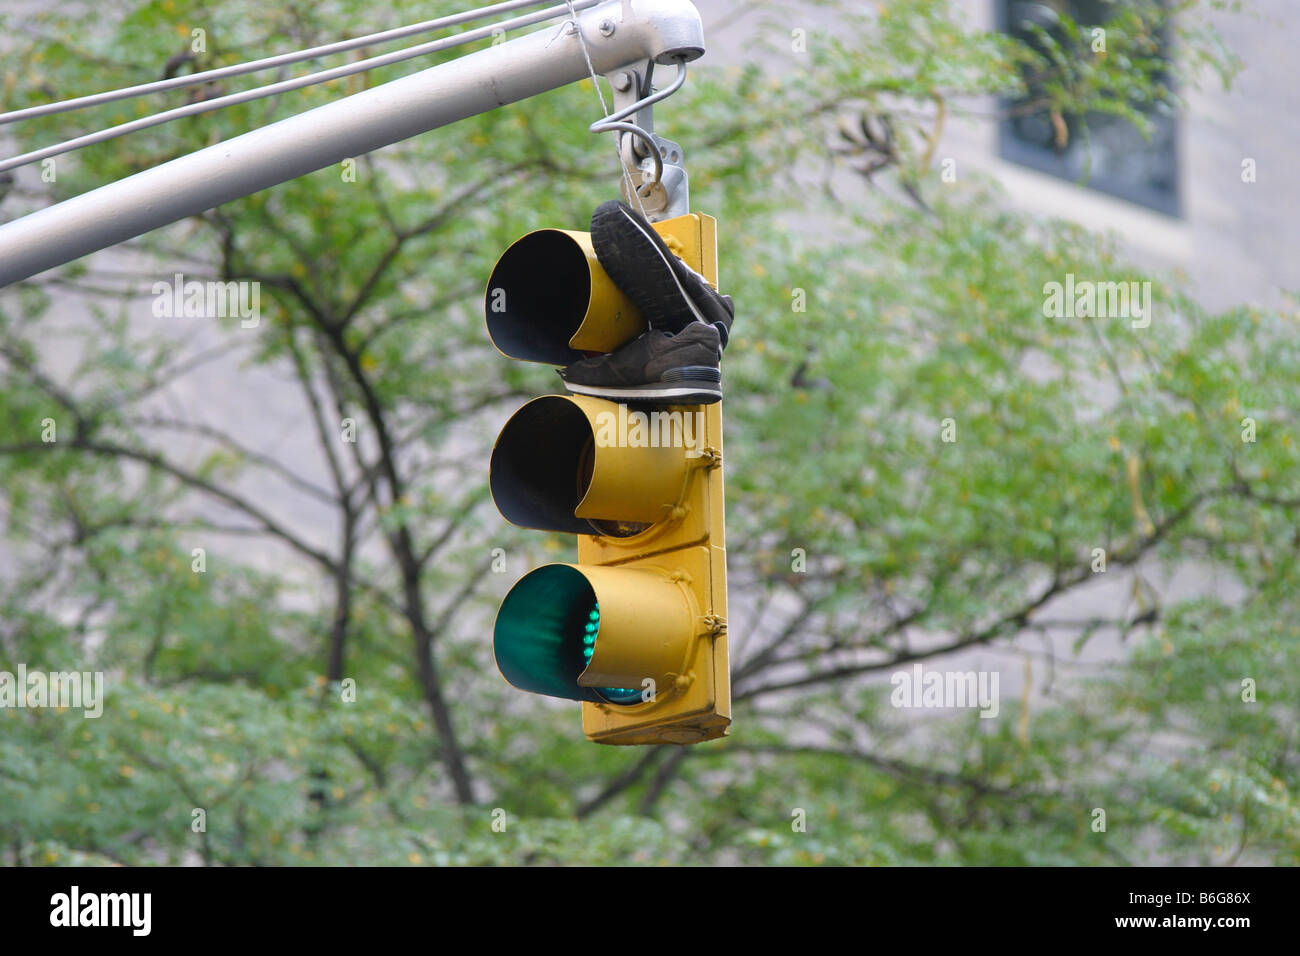 A pair of sneakers hanging on a set of traffic lights in New York Stock Photo